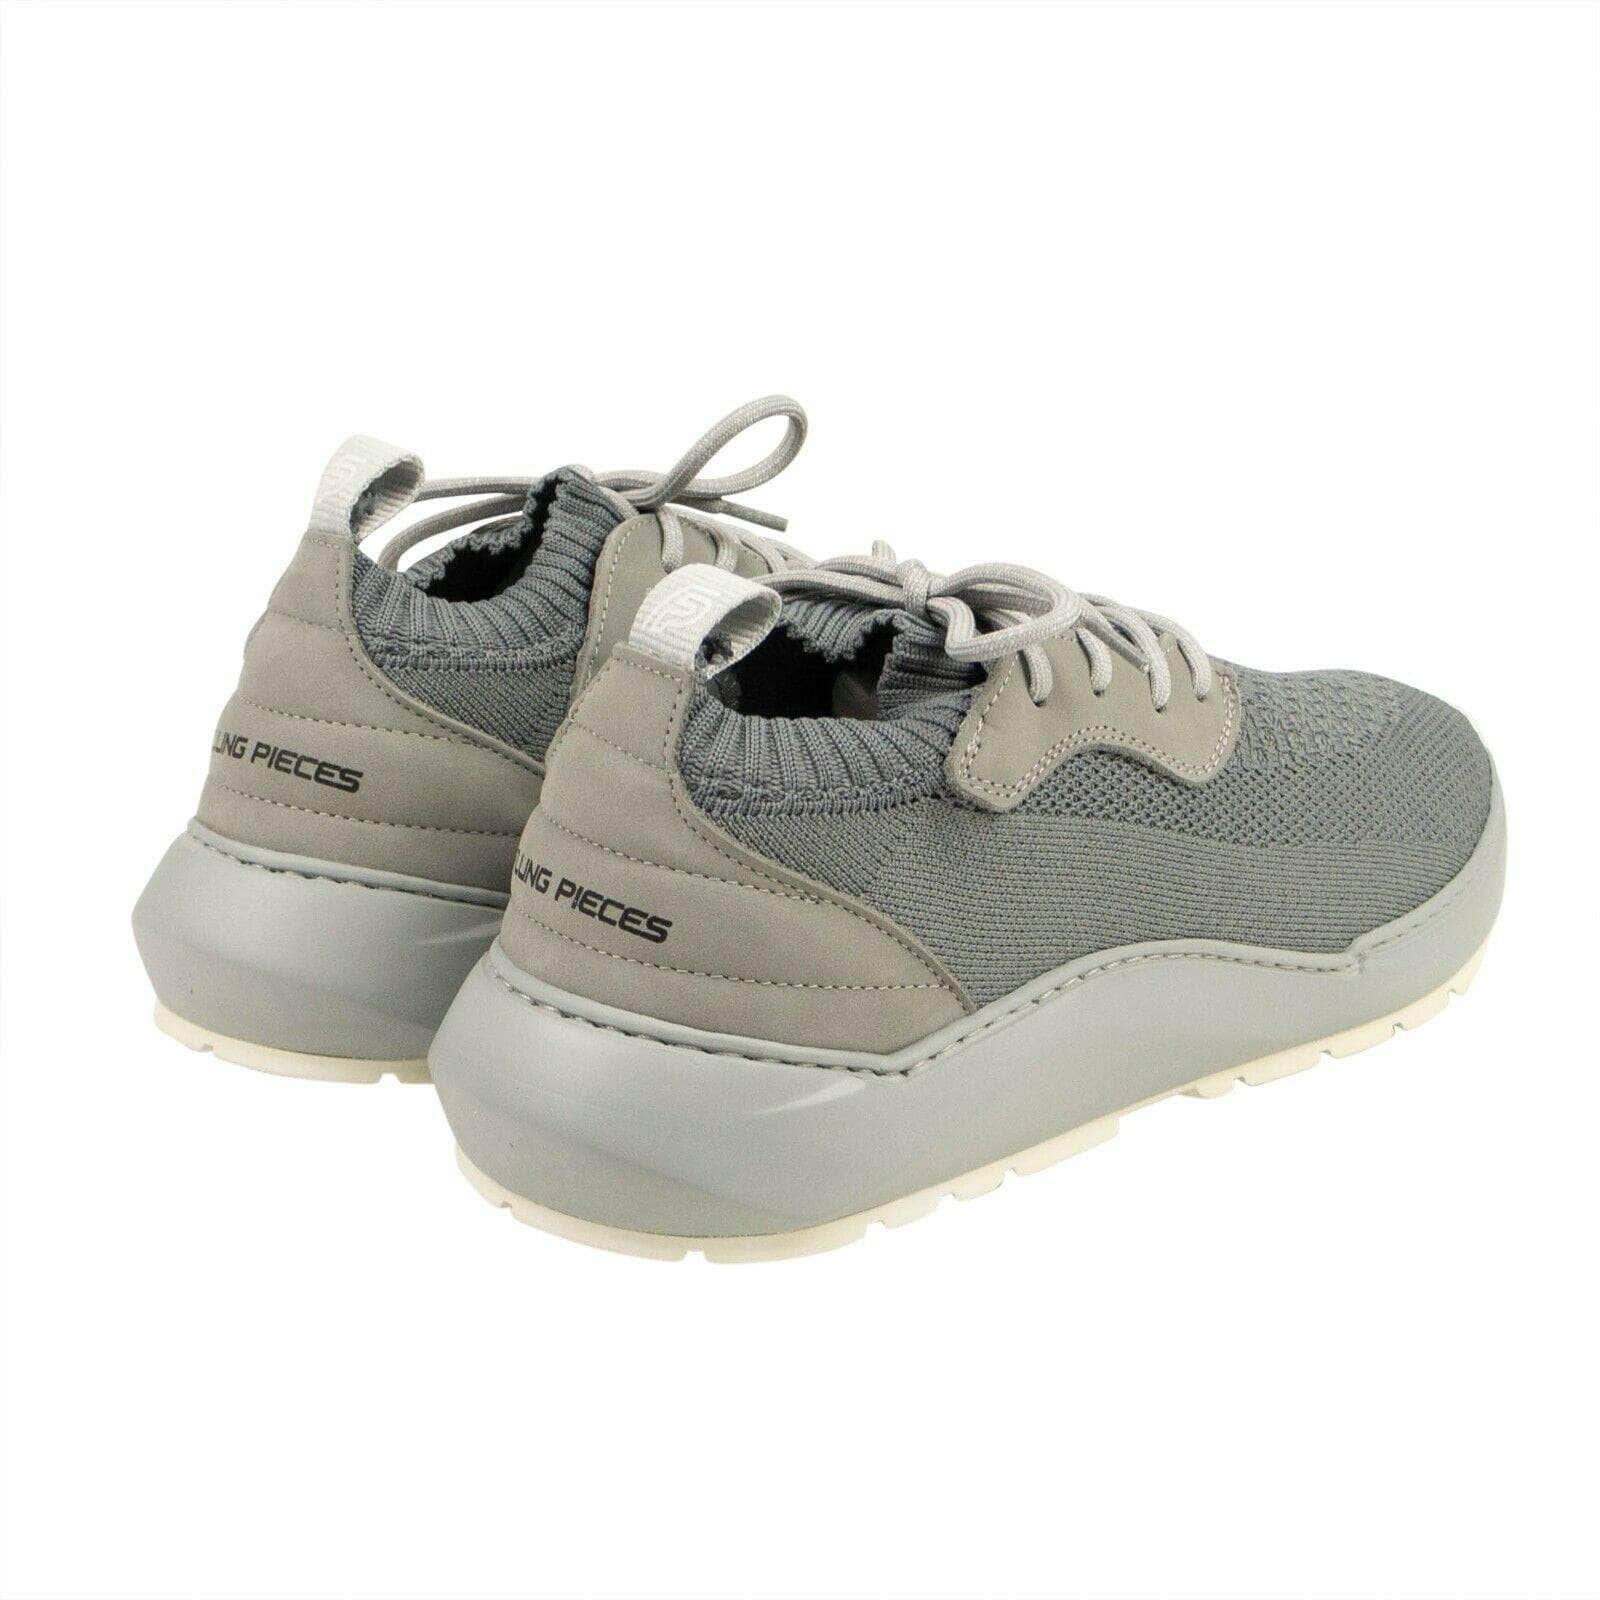 Filling Pieces channelenable-all, chicmi, couponcollection, filling-pieces, gender-mens, main-shoes, mens-shoes, size-40, size-41, size-42, size-43, size-44, under-250 Grey Knit Speed Arch Runner Sneakers